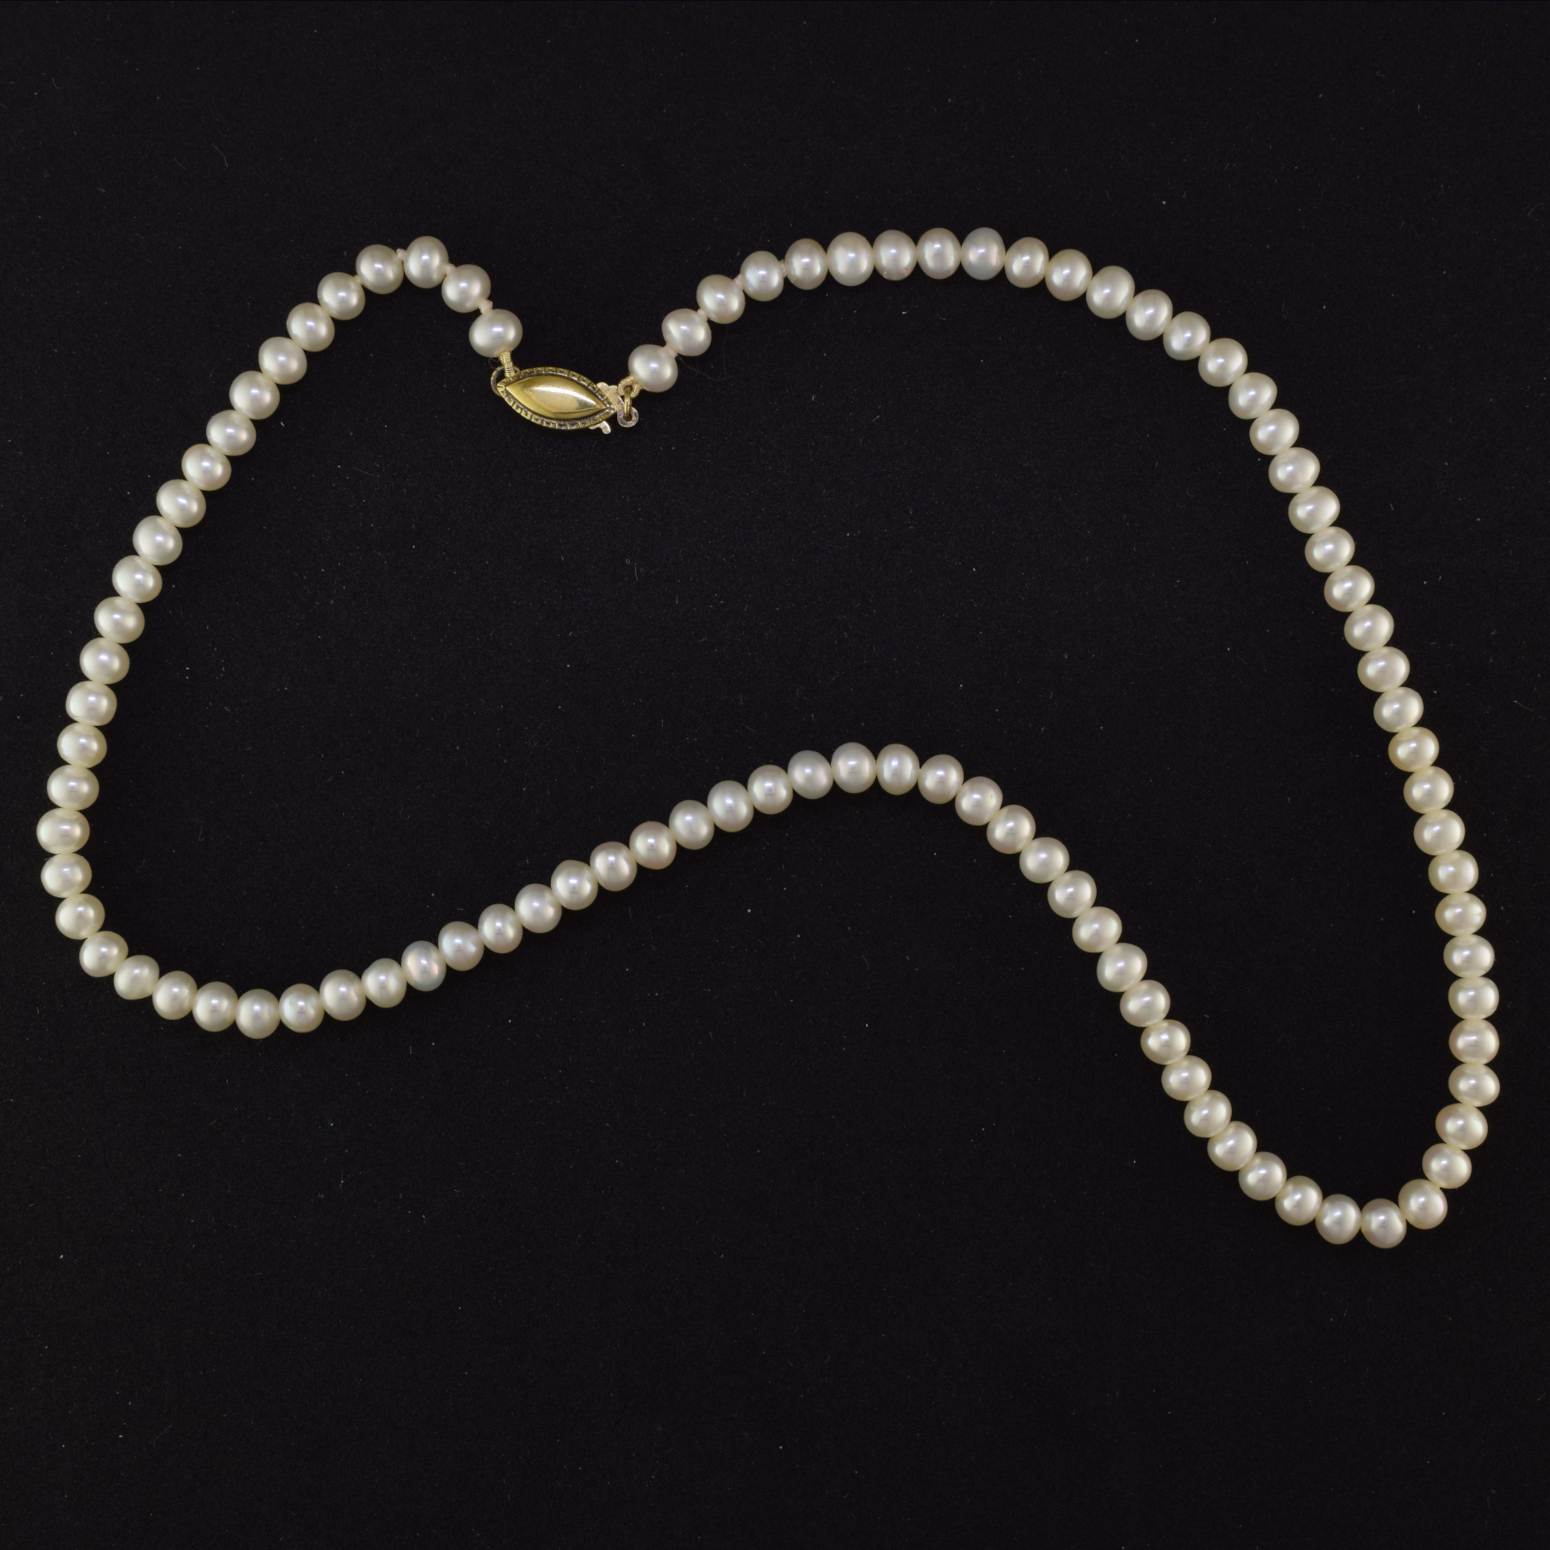 9ct Gold Freshwater Cultured Pearl Necklace 16